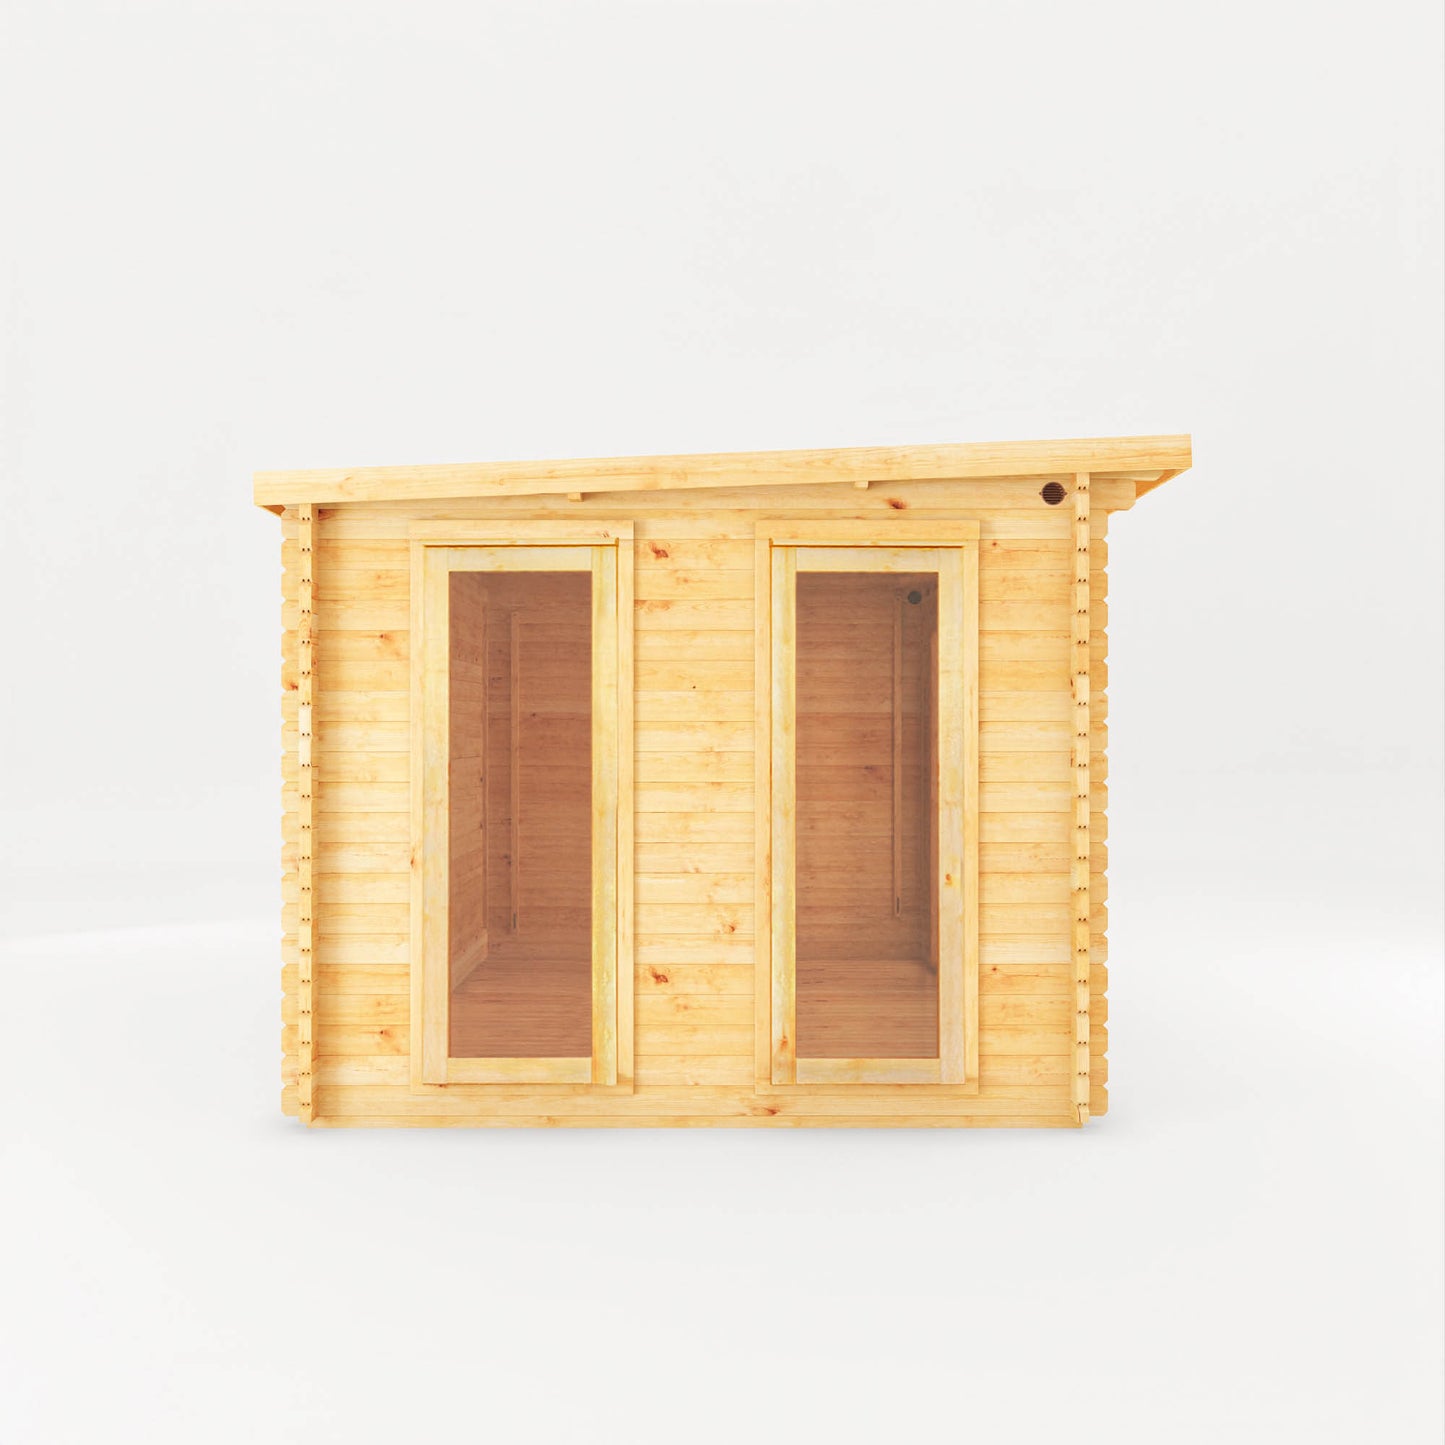 The 7m x 3m Wren Log Cabin with Patio Area